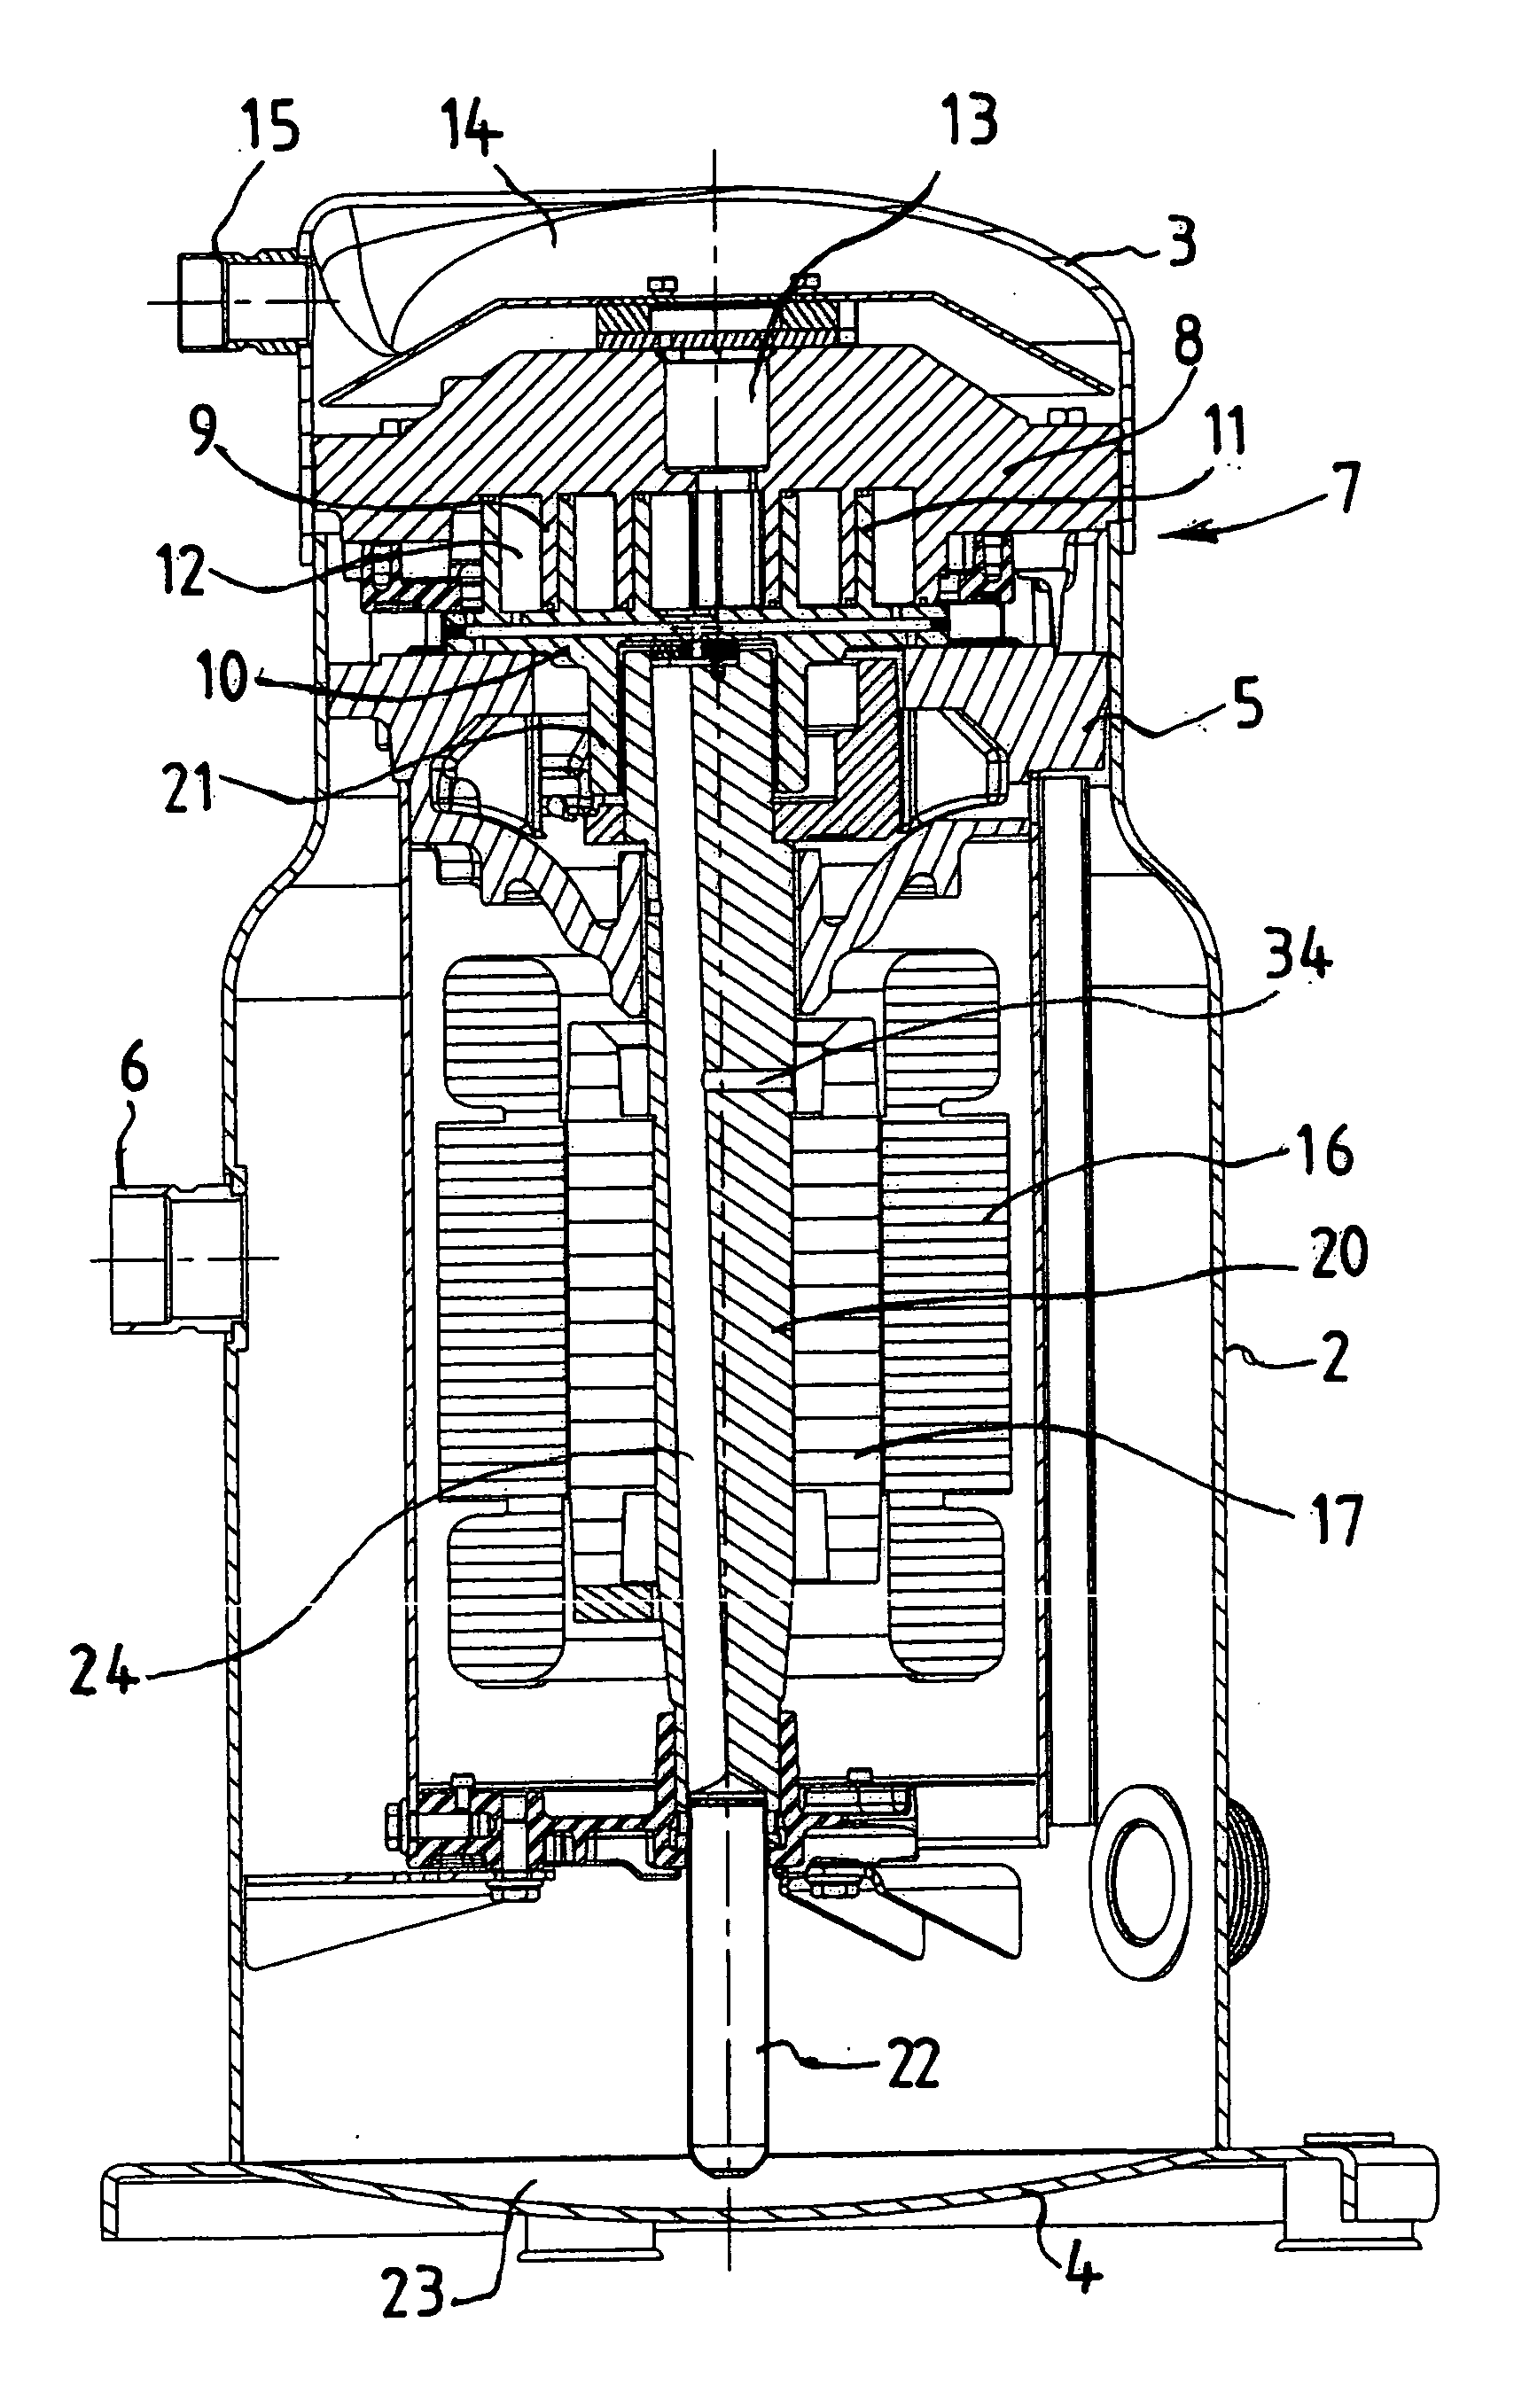 Refrigerating compressor with variable-speed coils